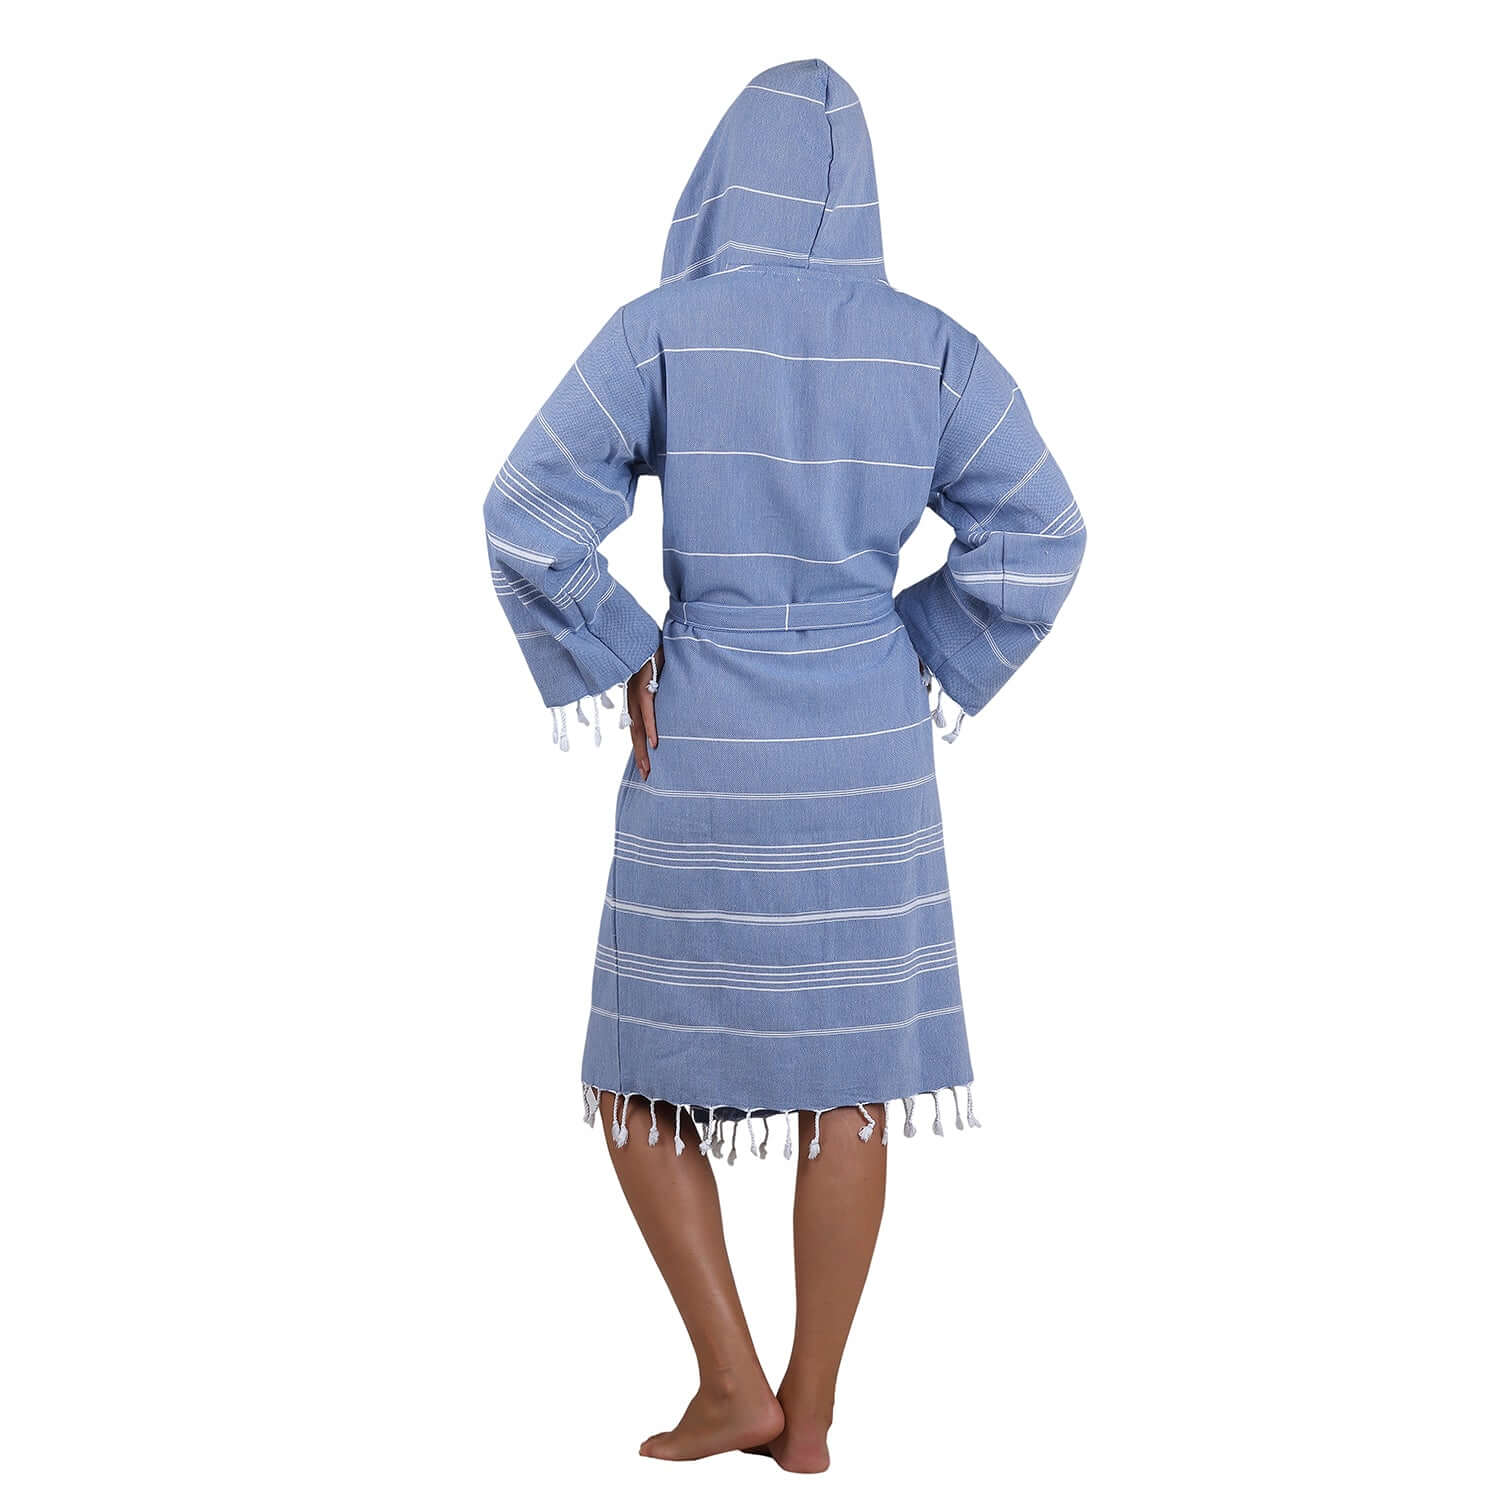 Rear view of the man wearing Loom Legacy xsmall/small blue bathrobe showcasing the hood, white stripe pattern, and fringe detailing at the bottom.